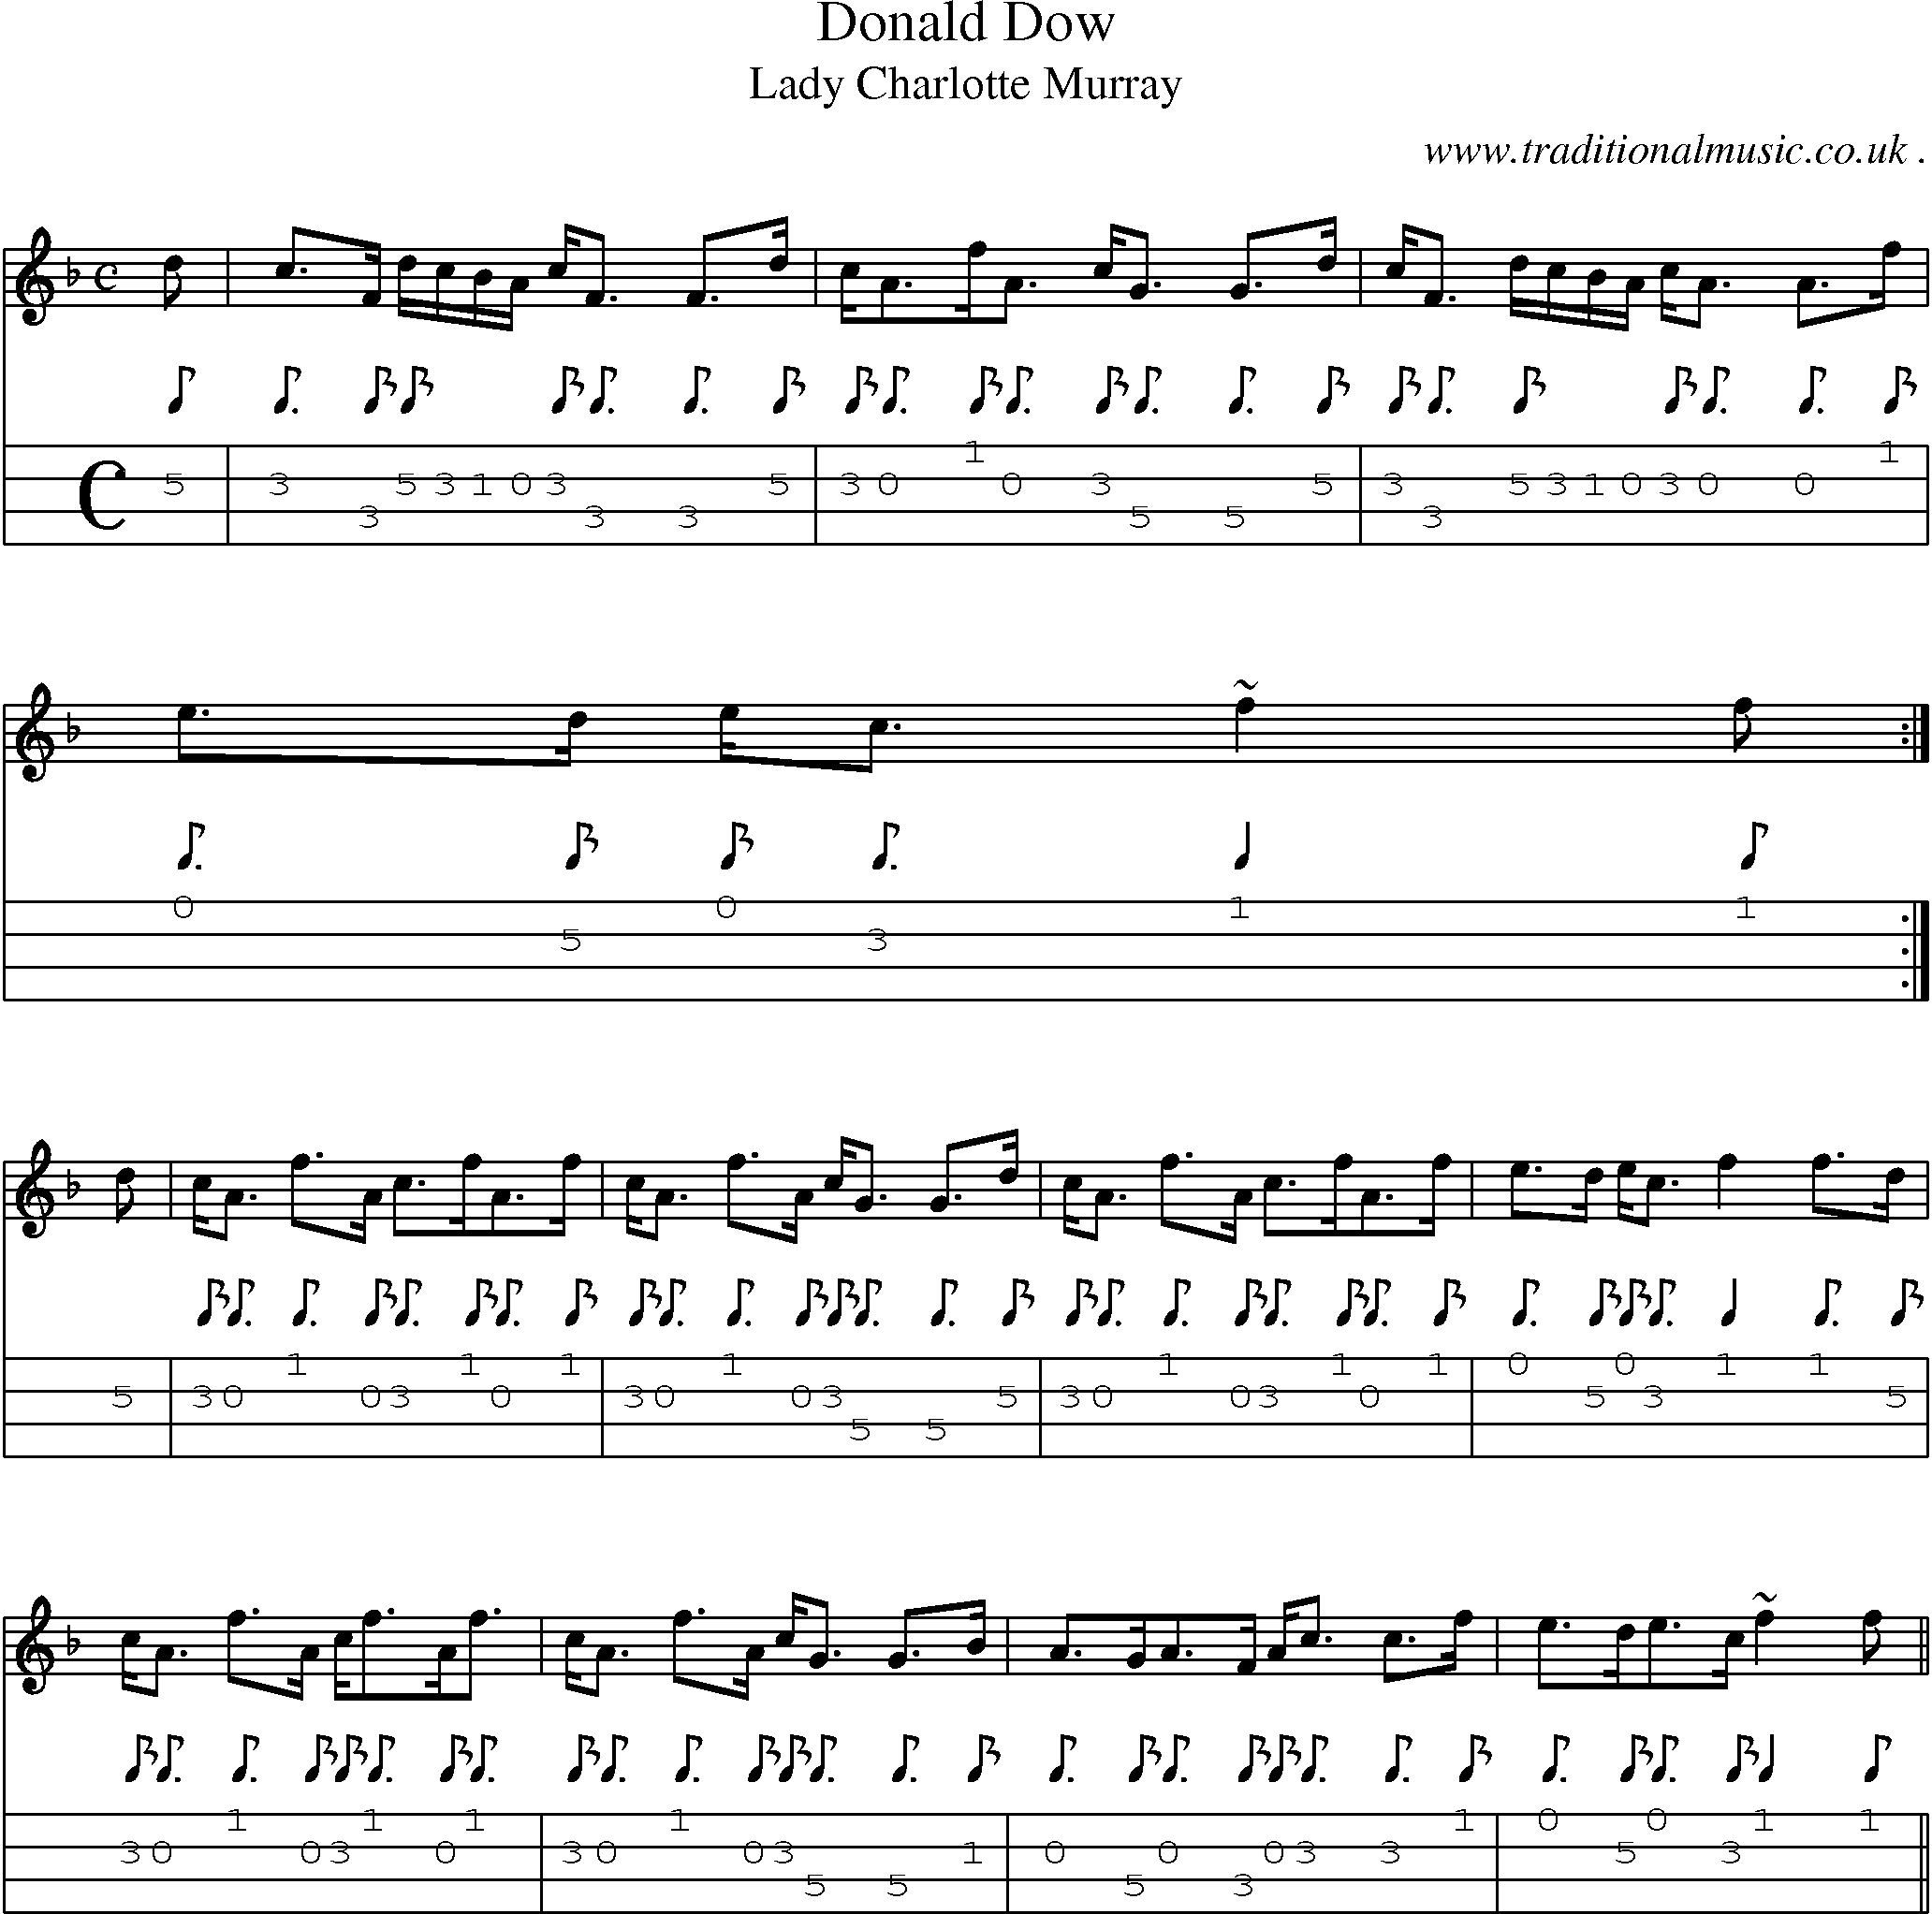 Sheet-music  score, Chords and Mandolin Tabs for Donald Dow